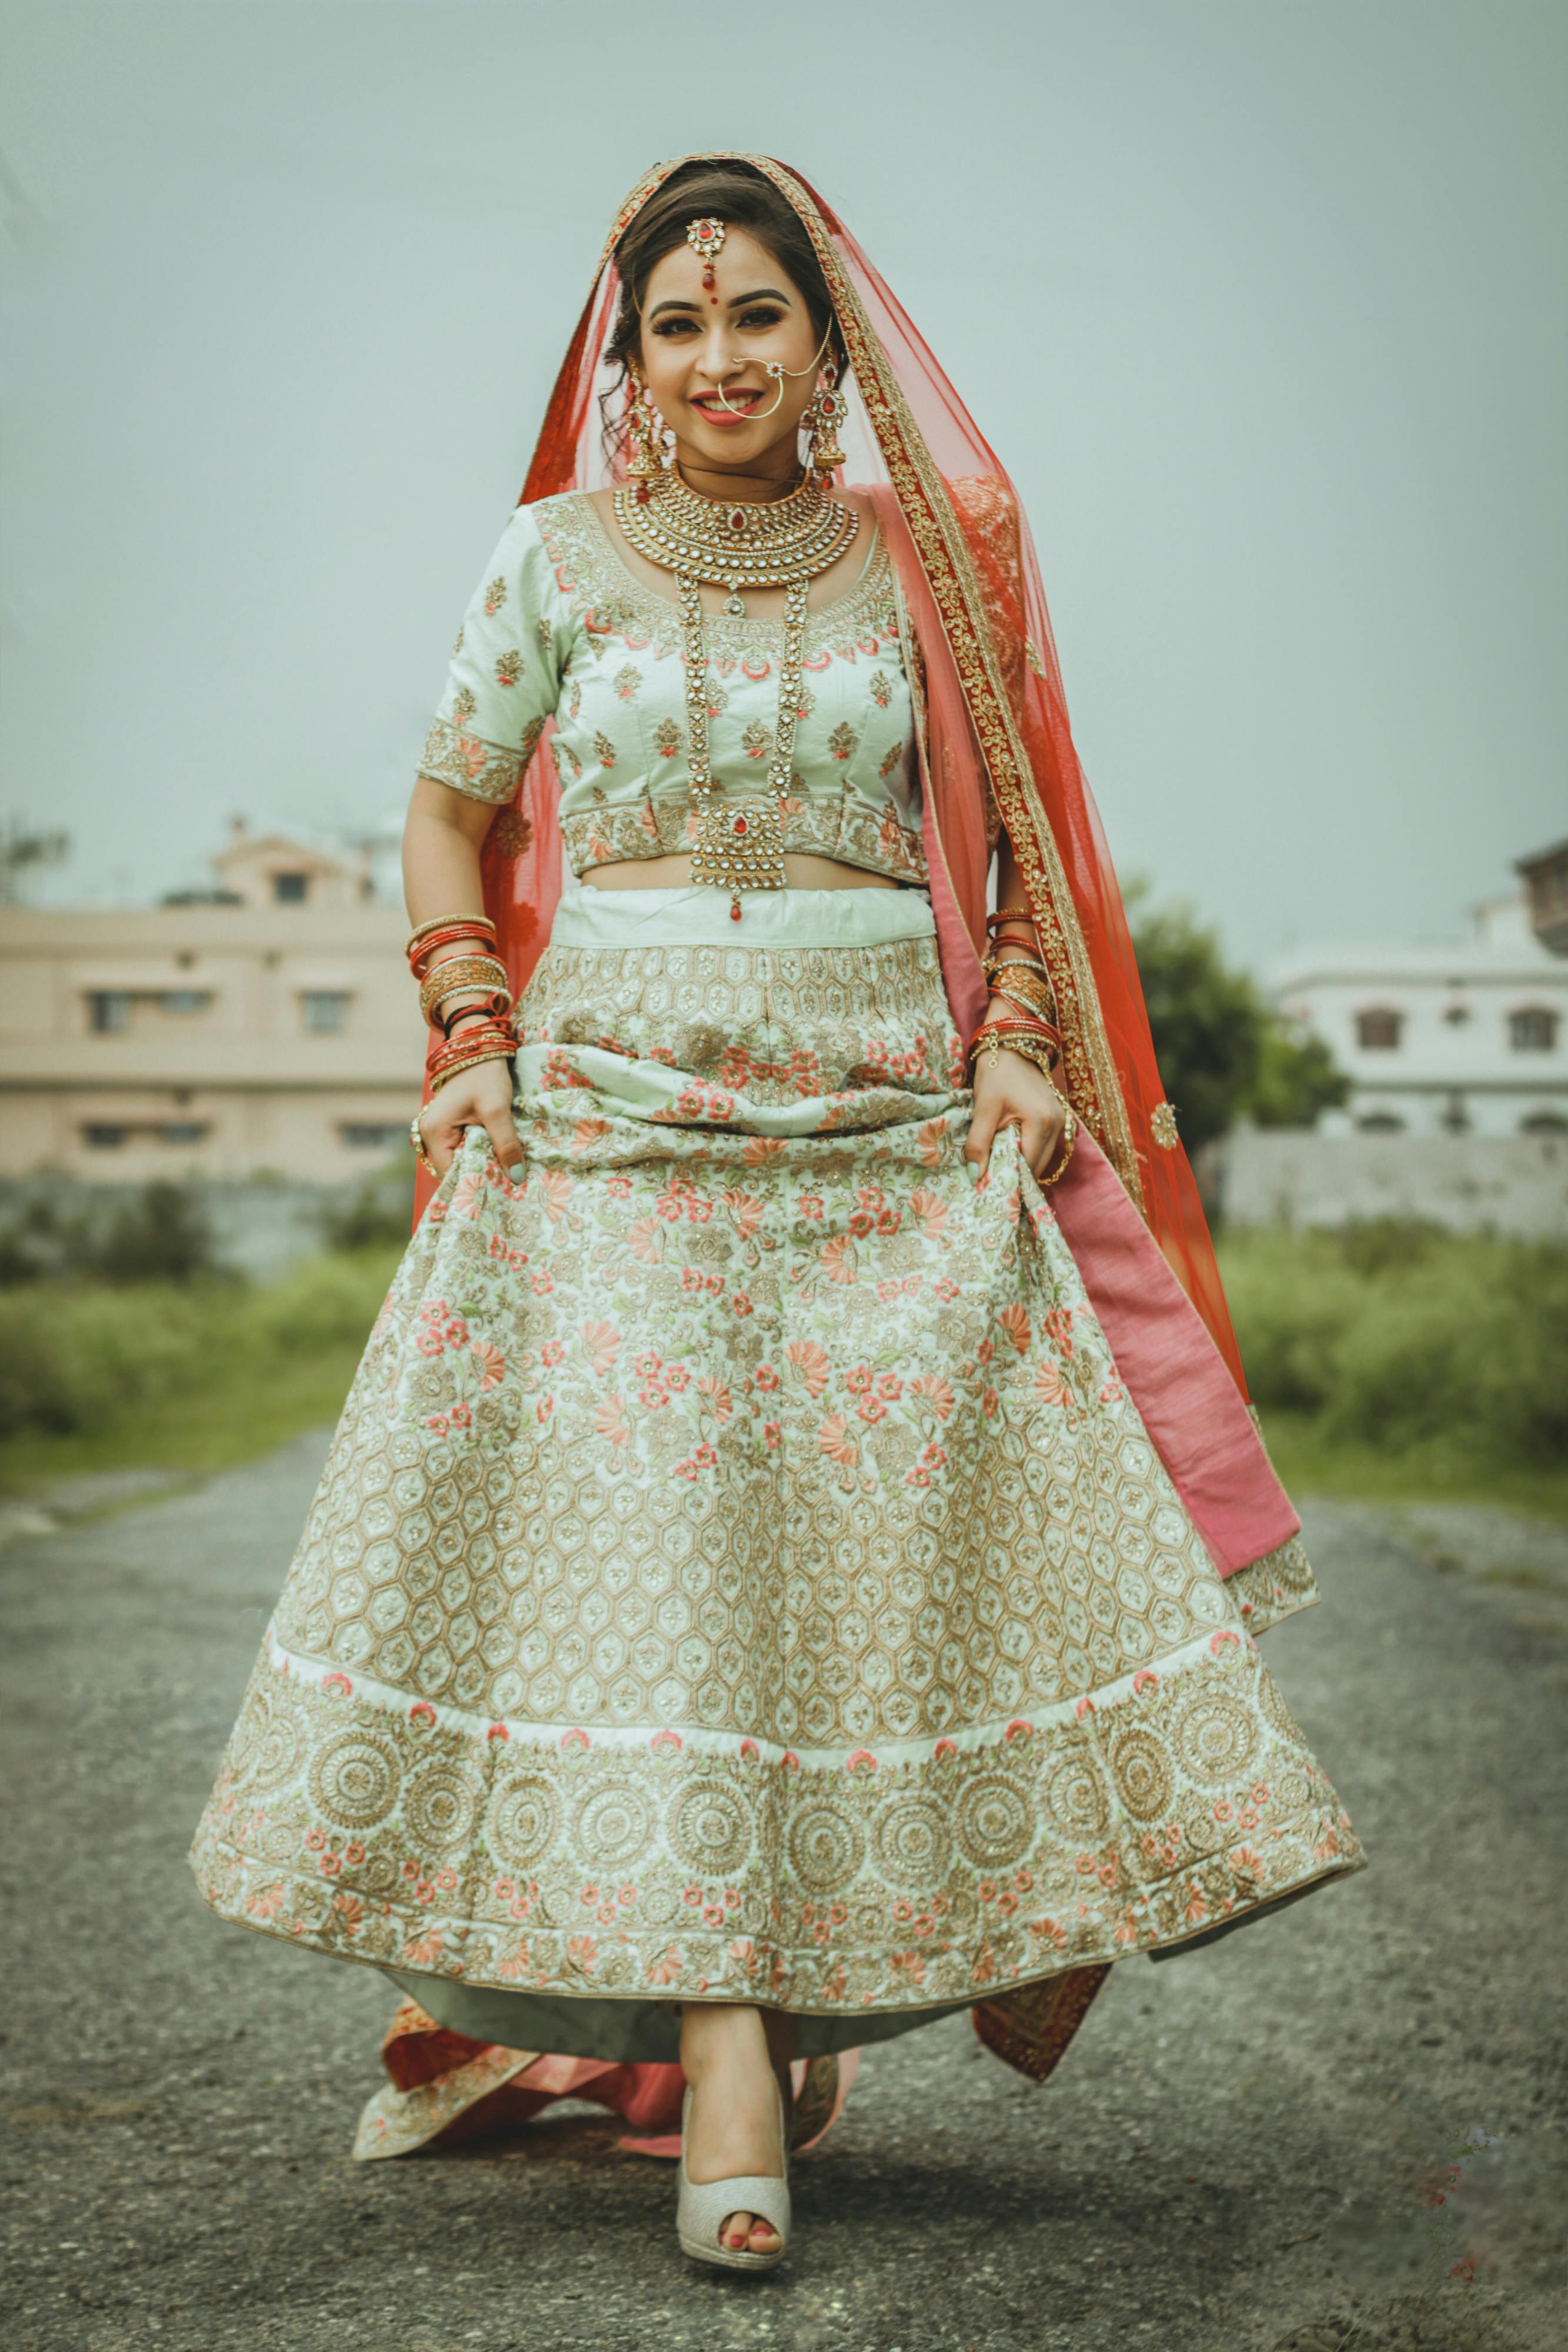 Bridal Lehengas With Long Train and Veil Get Love From Brides